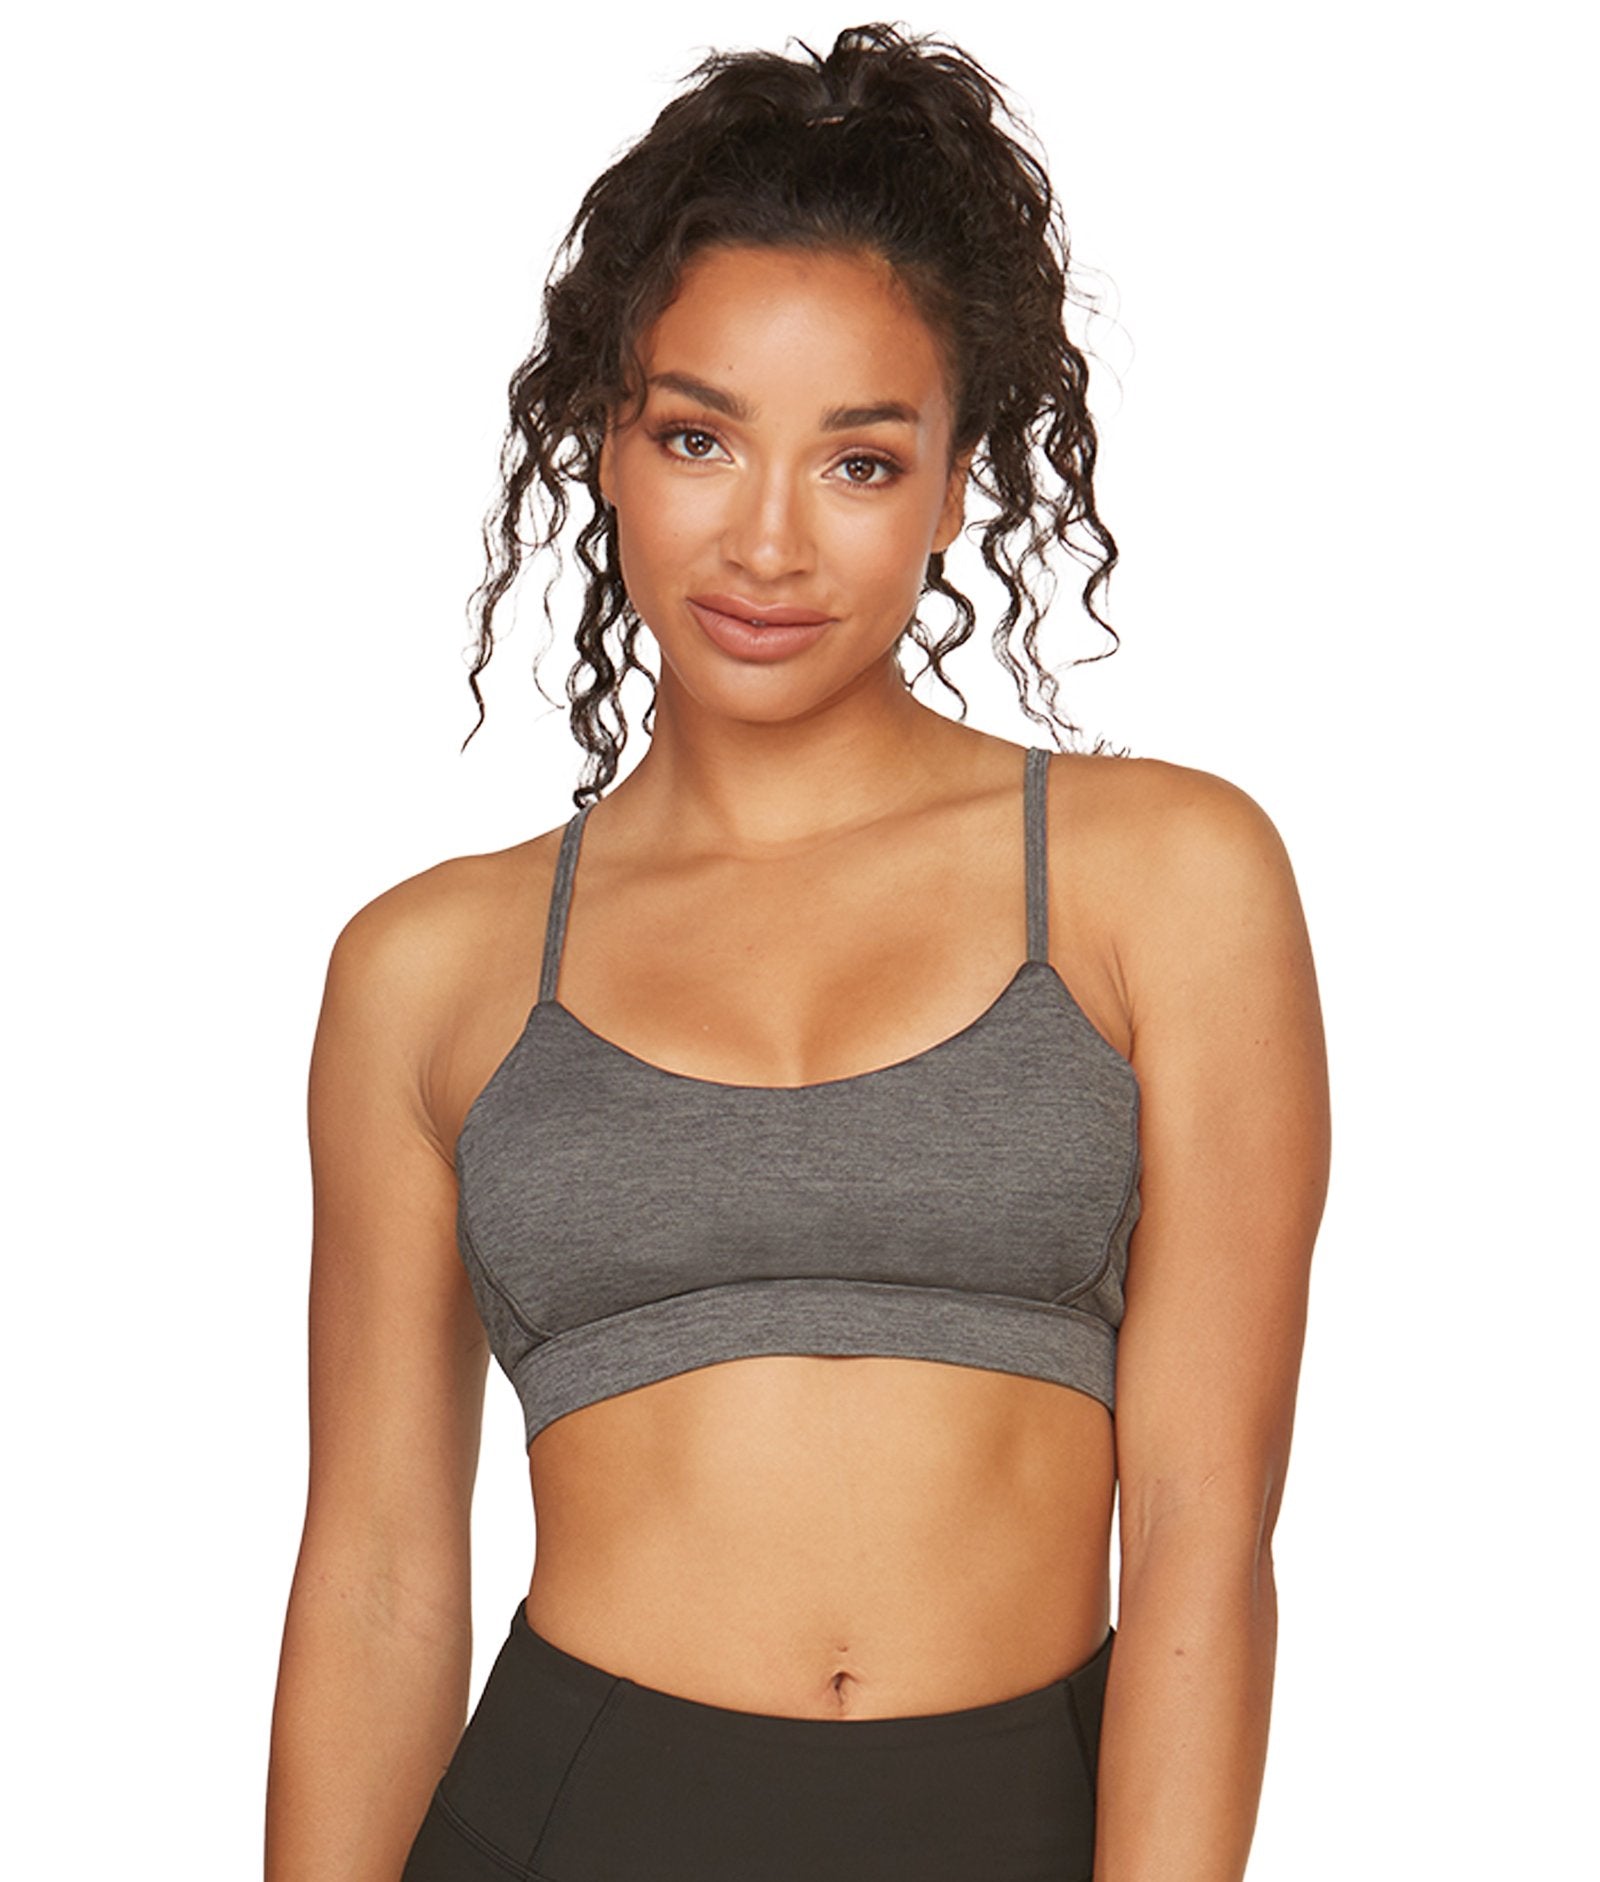 Women's Heather Charcoal Aloft Recycled Bralette